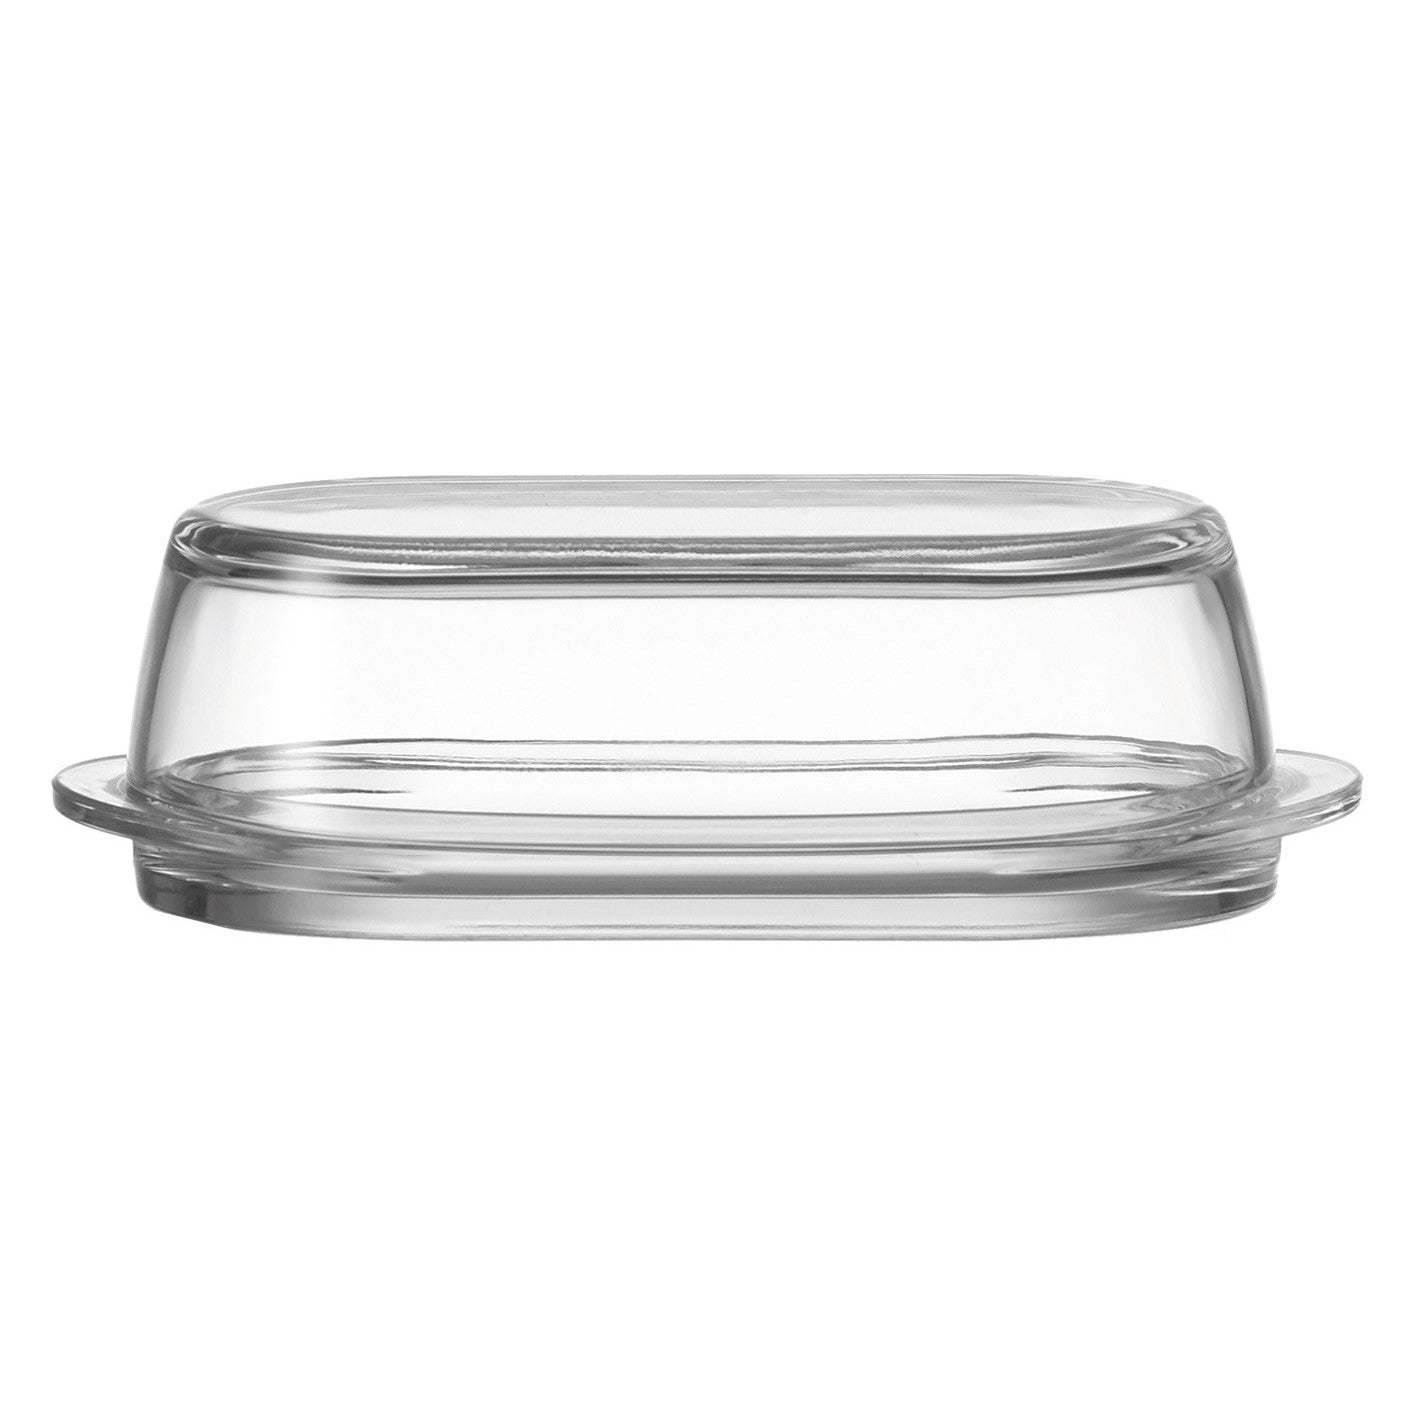 GB/Butter dish - CIAO